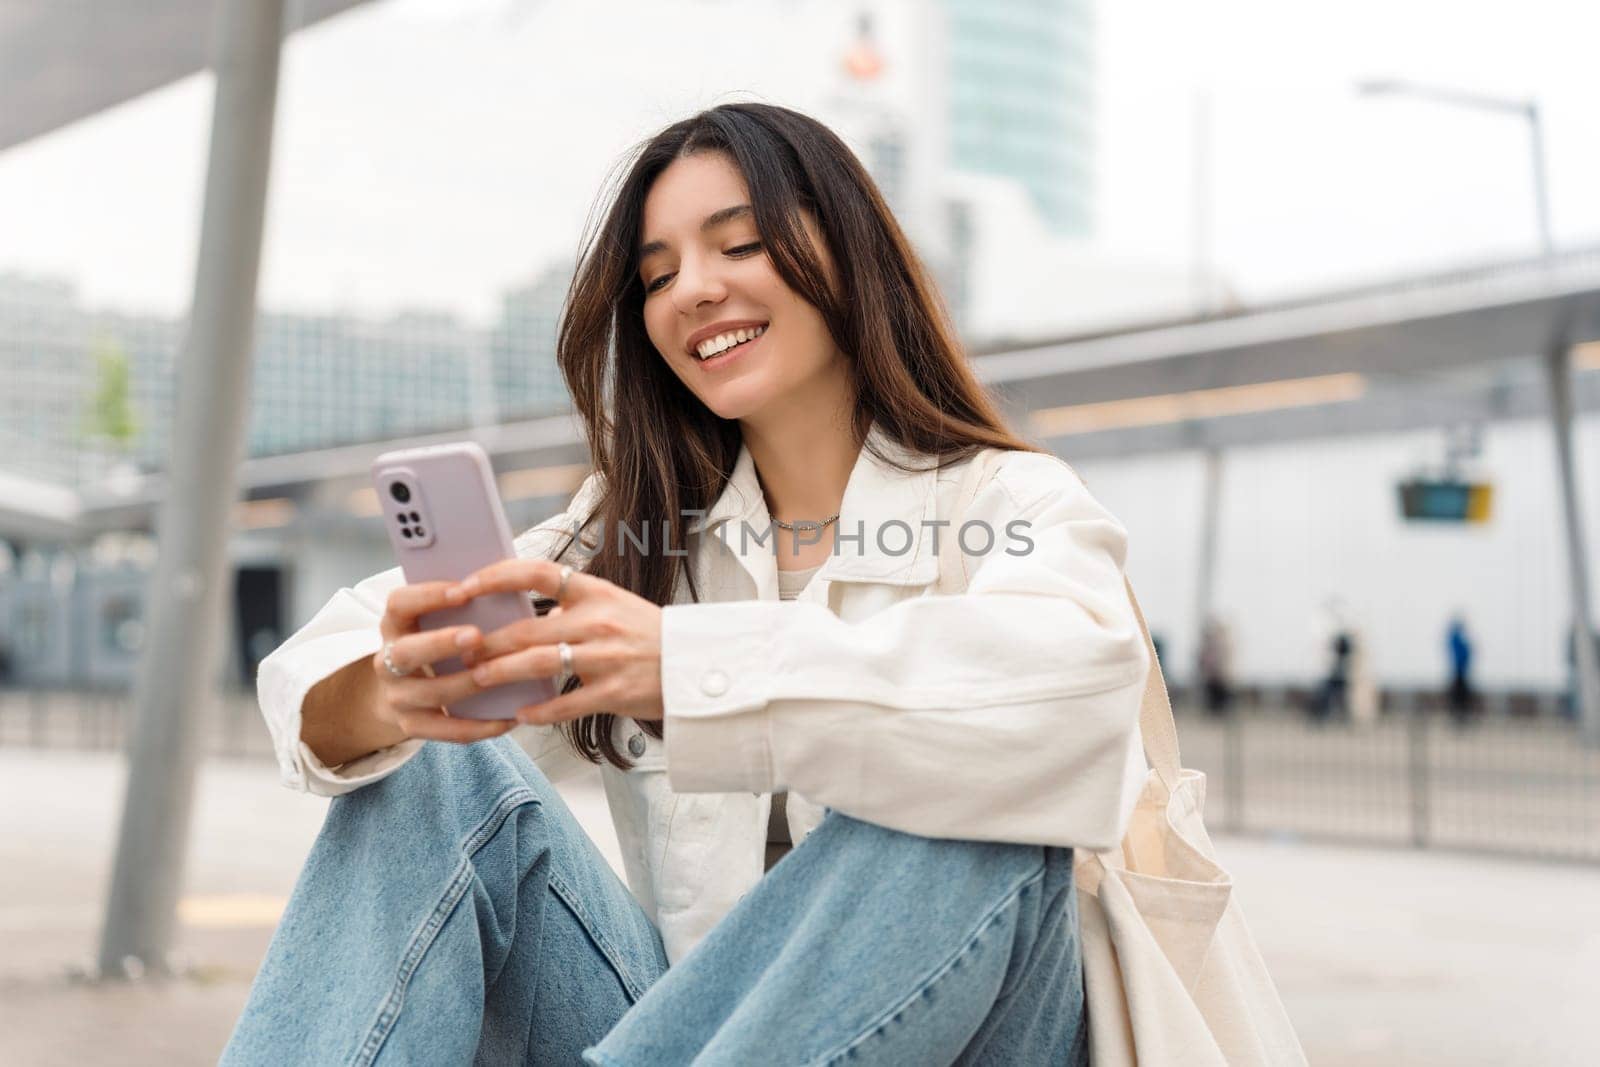 Bright and cheerful young woman with shopper on shoulder waiting public transport at station smiling beautifully while texting on phone.